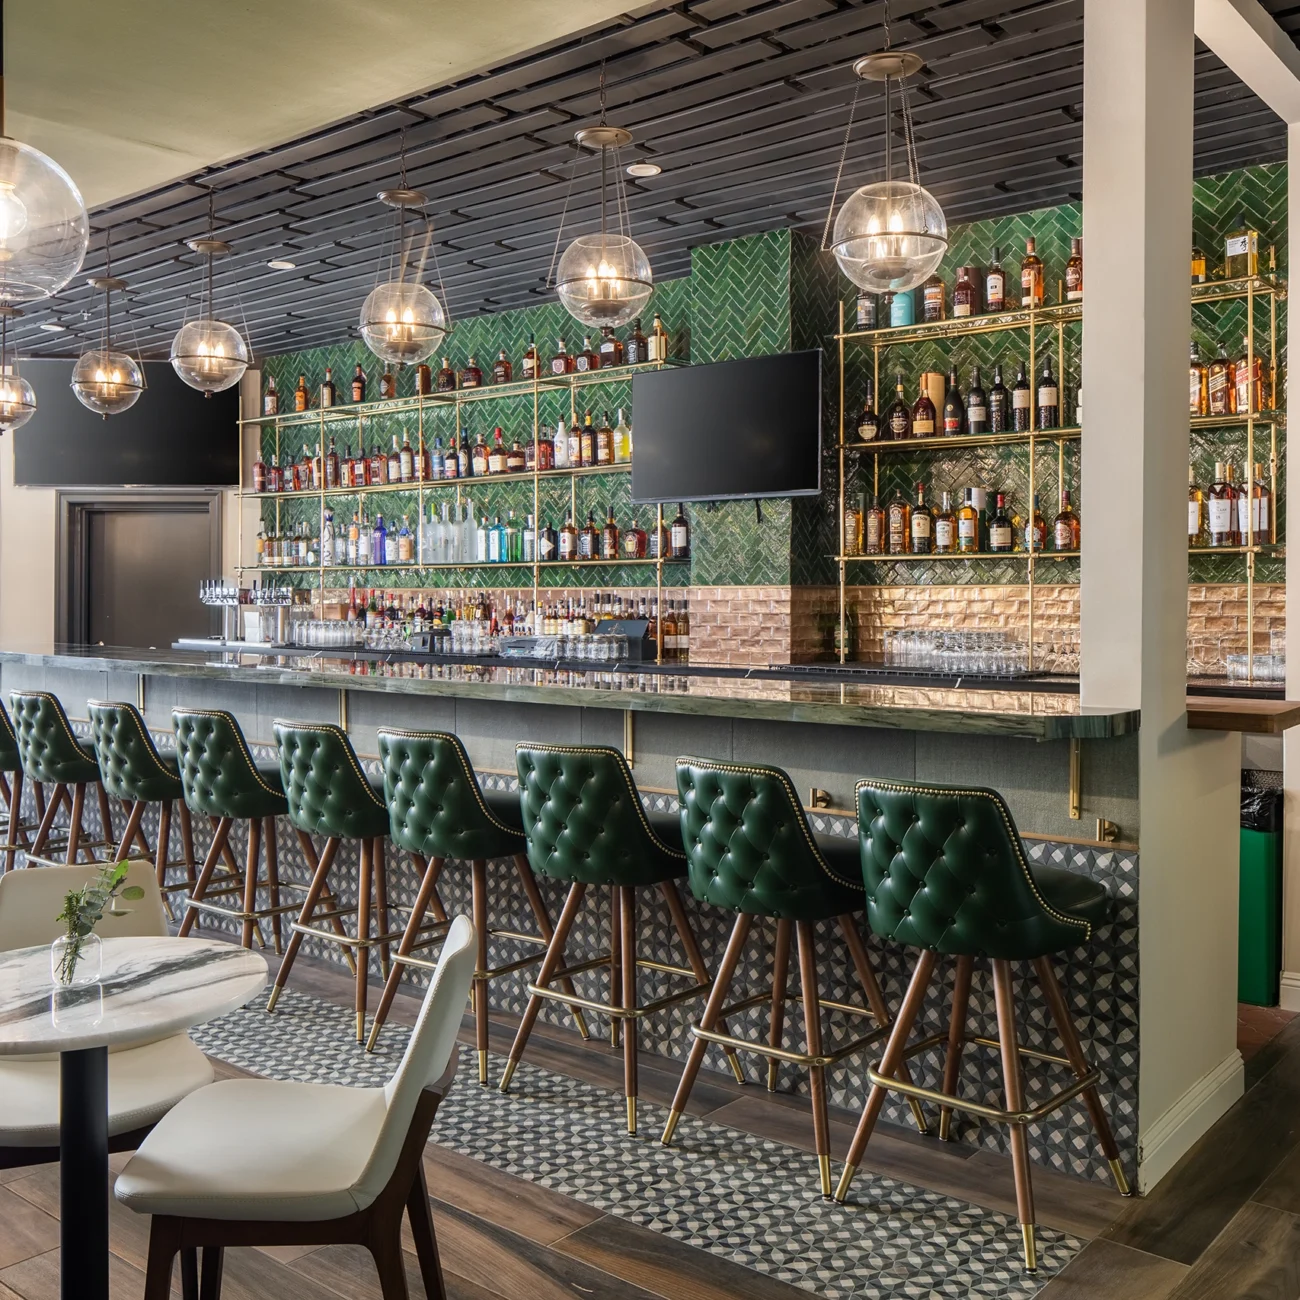 Christine Vroom Interiors Pacific Standard | Contemporary Restaurant Interior deep green leather tufted high chairs at bar